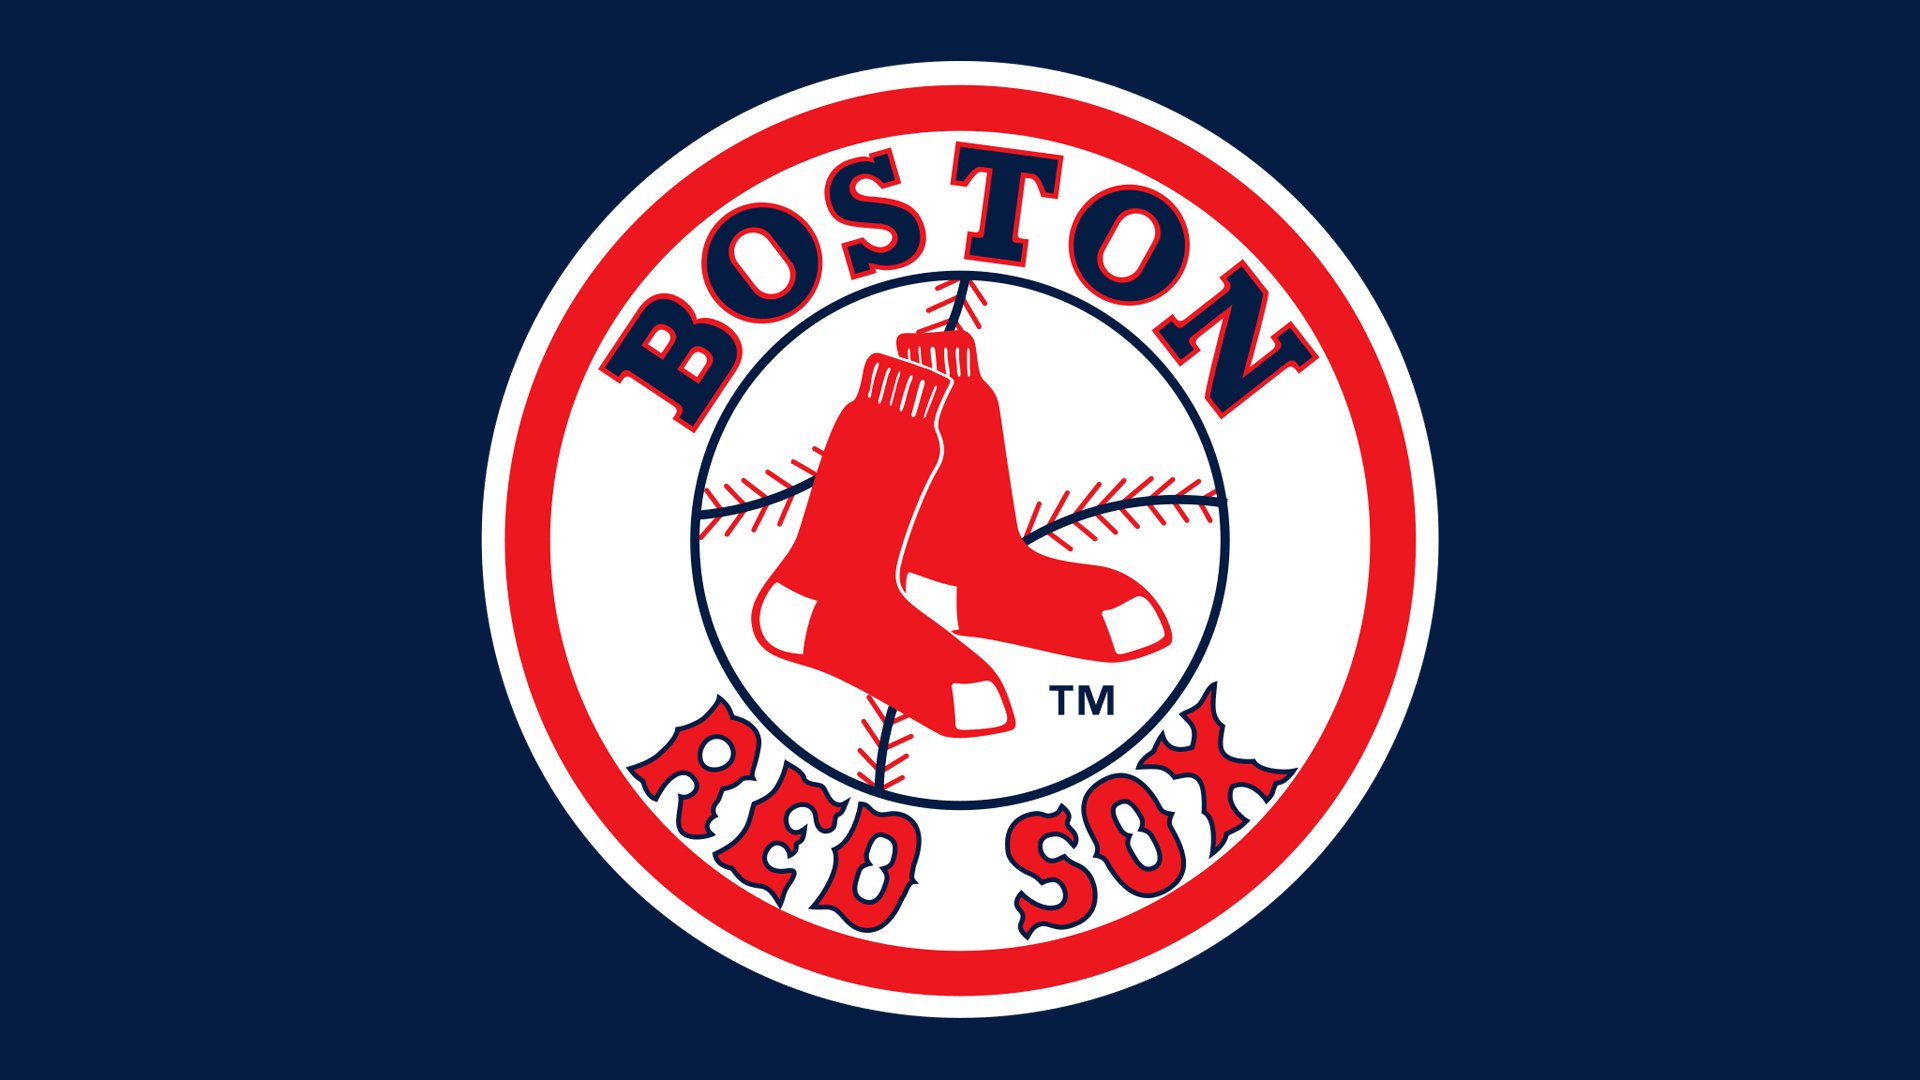 red sox colors